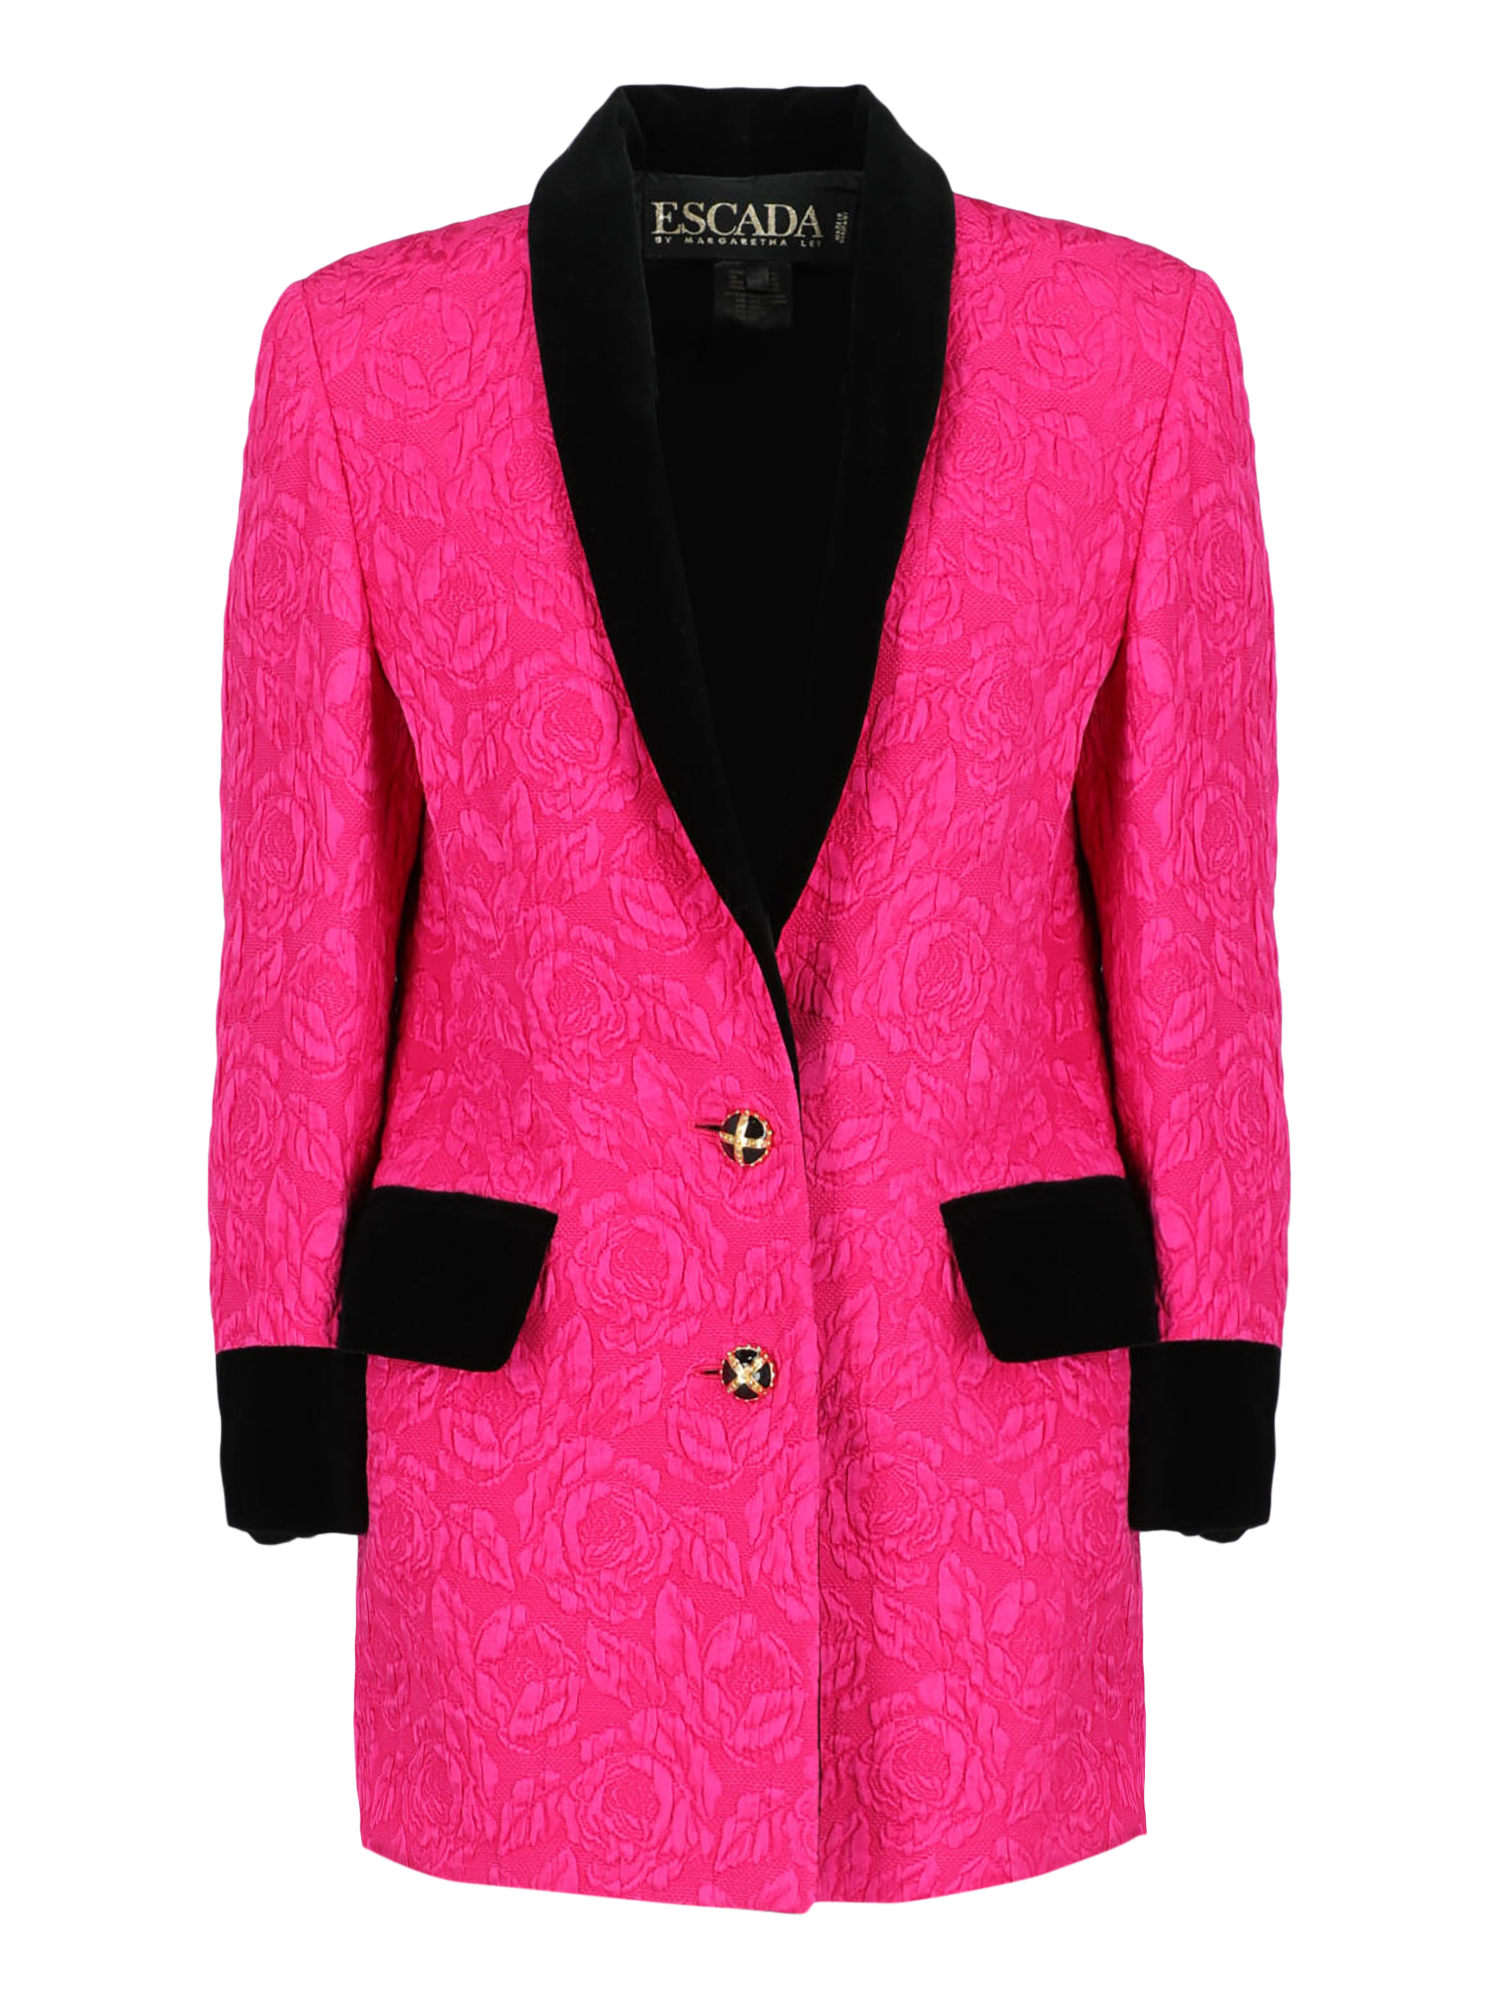 Condition: Very Good, Solid Color Wool, Color: Black, Pink - M - FR 38 -